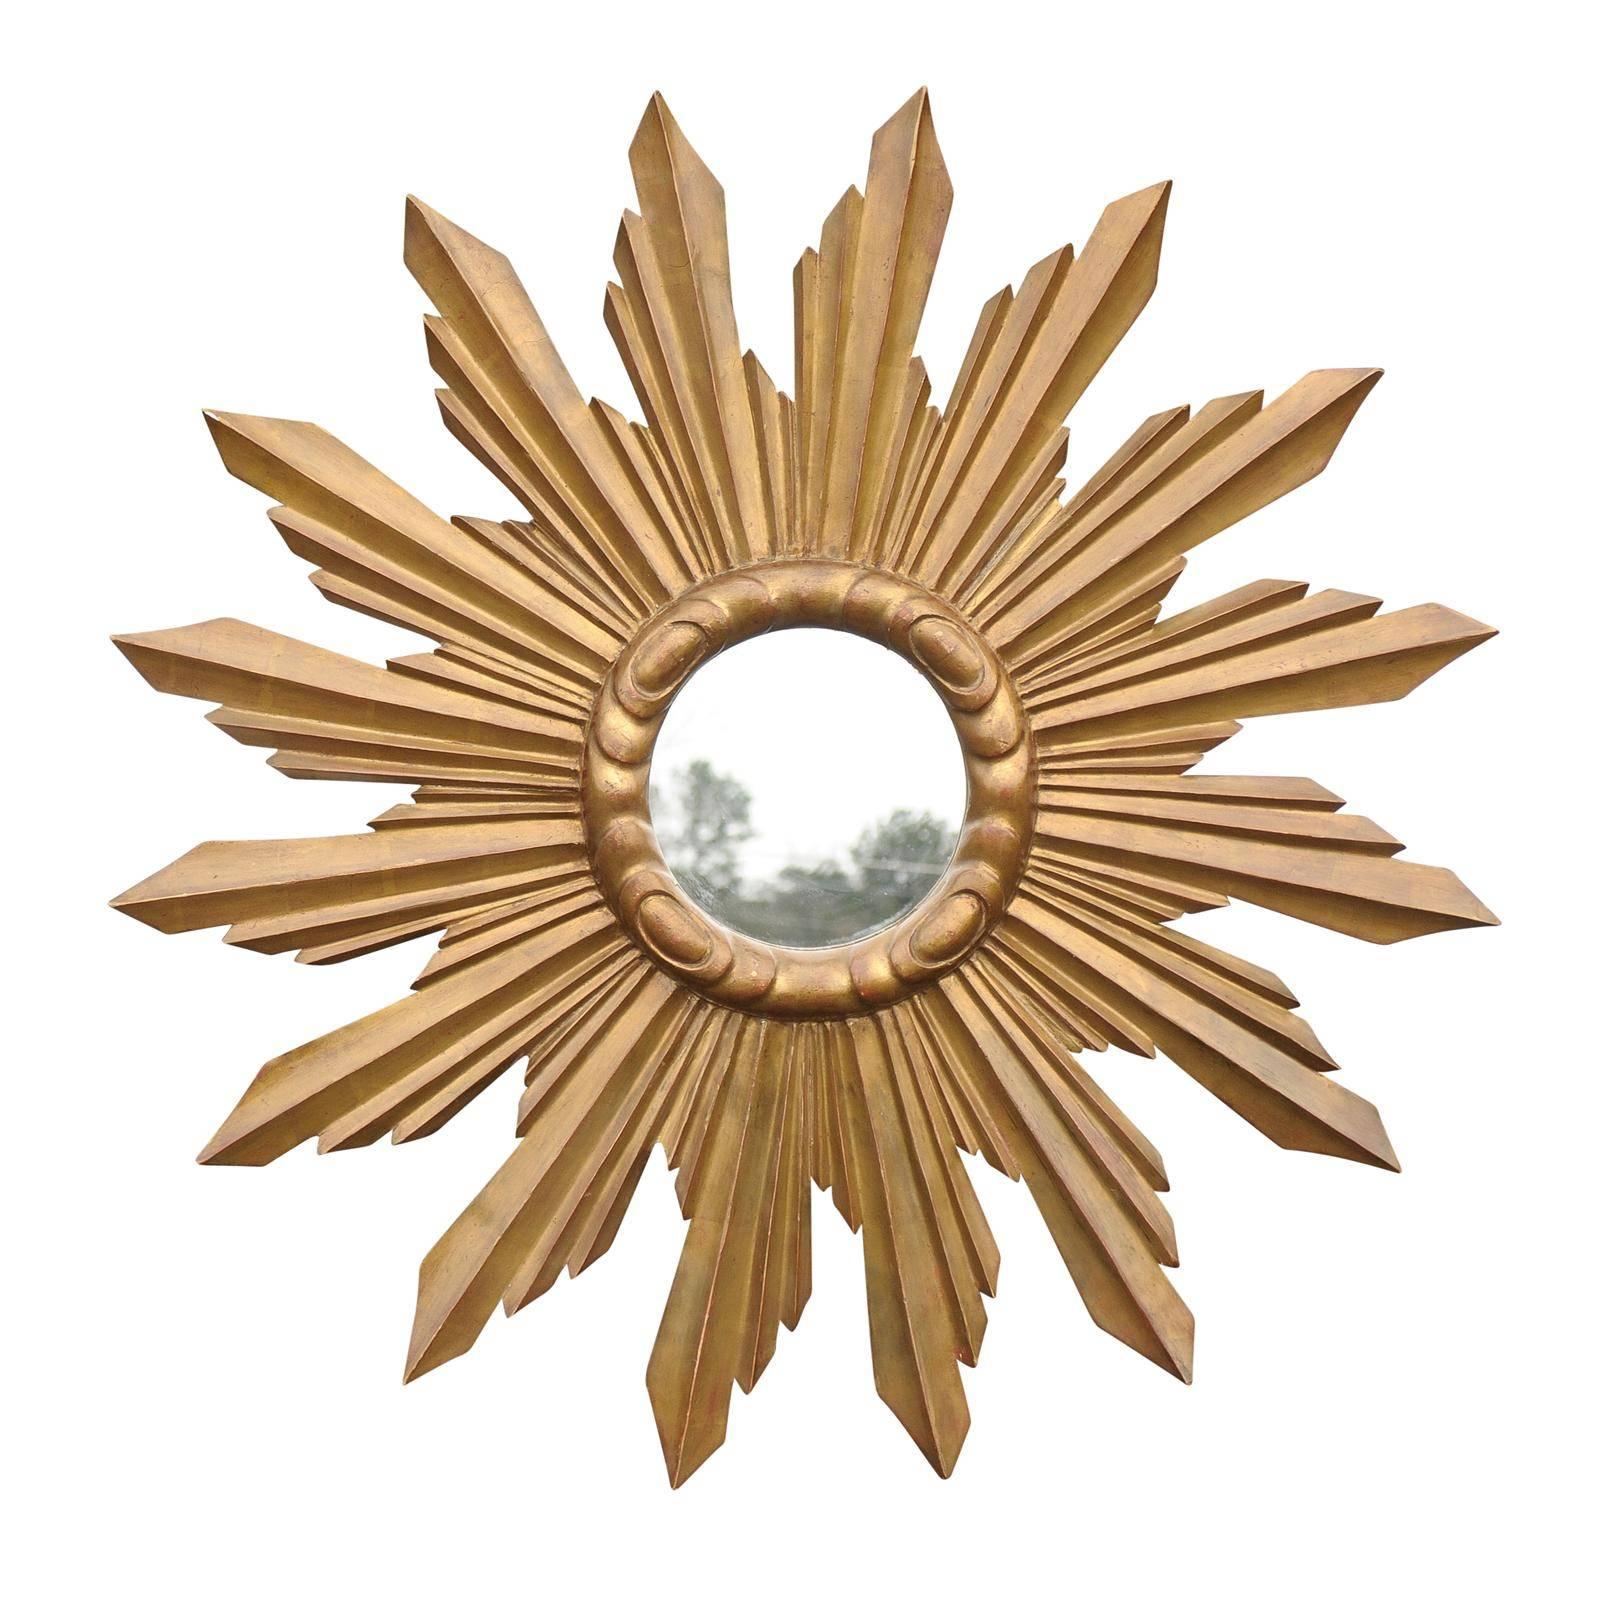 French Large Size Sunburst Mirror from the 1940s with Sunrays of Varying Sizes